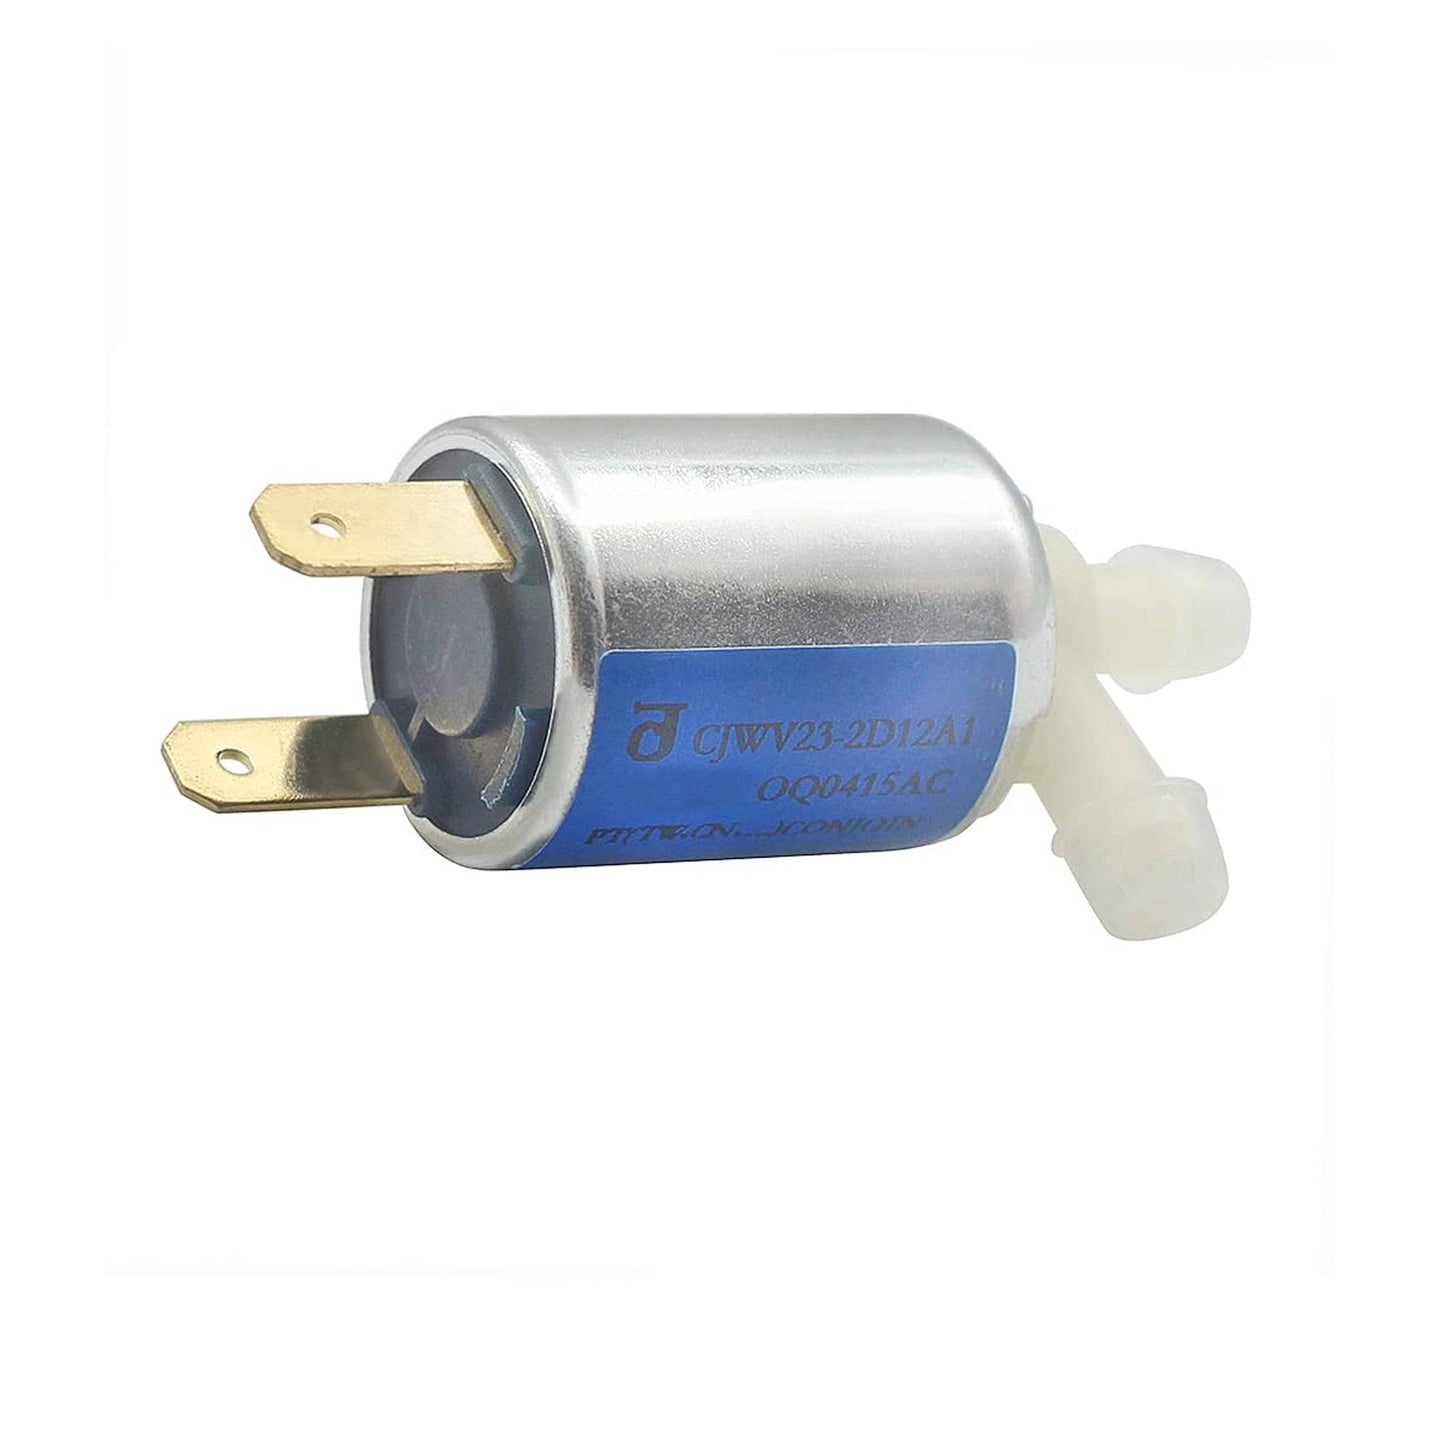 24V Mini Solenoid Valve for Water Air Gas - Normally Closed